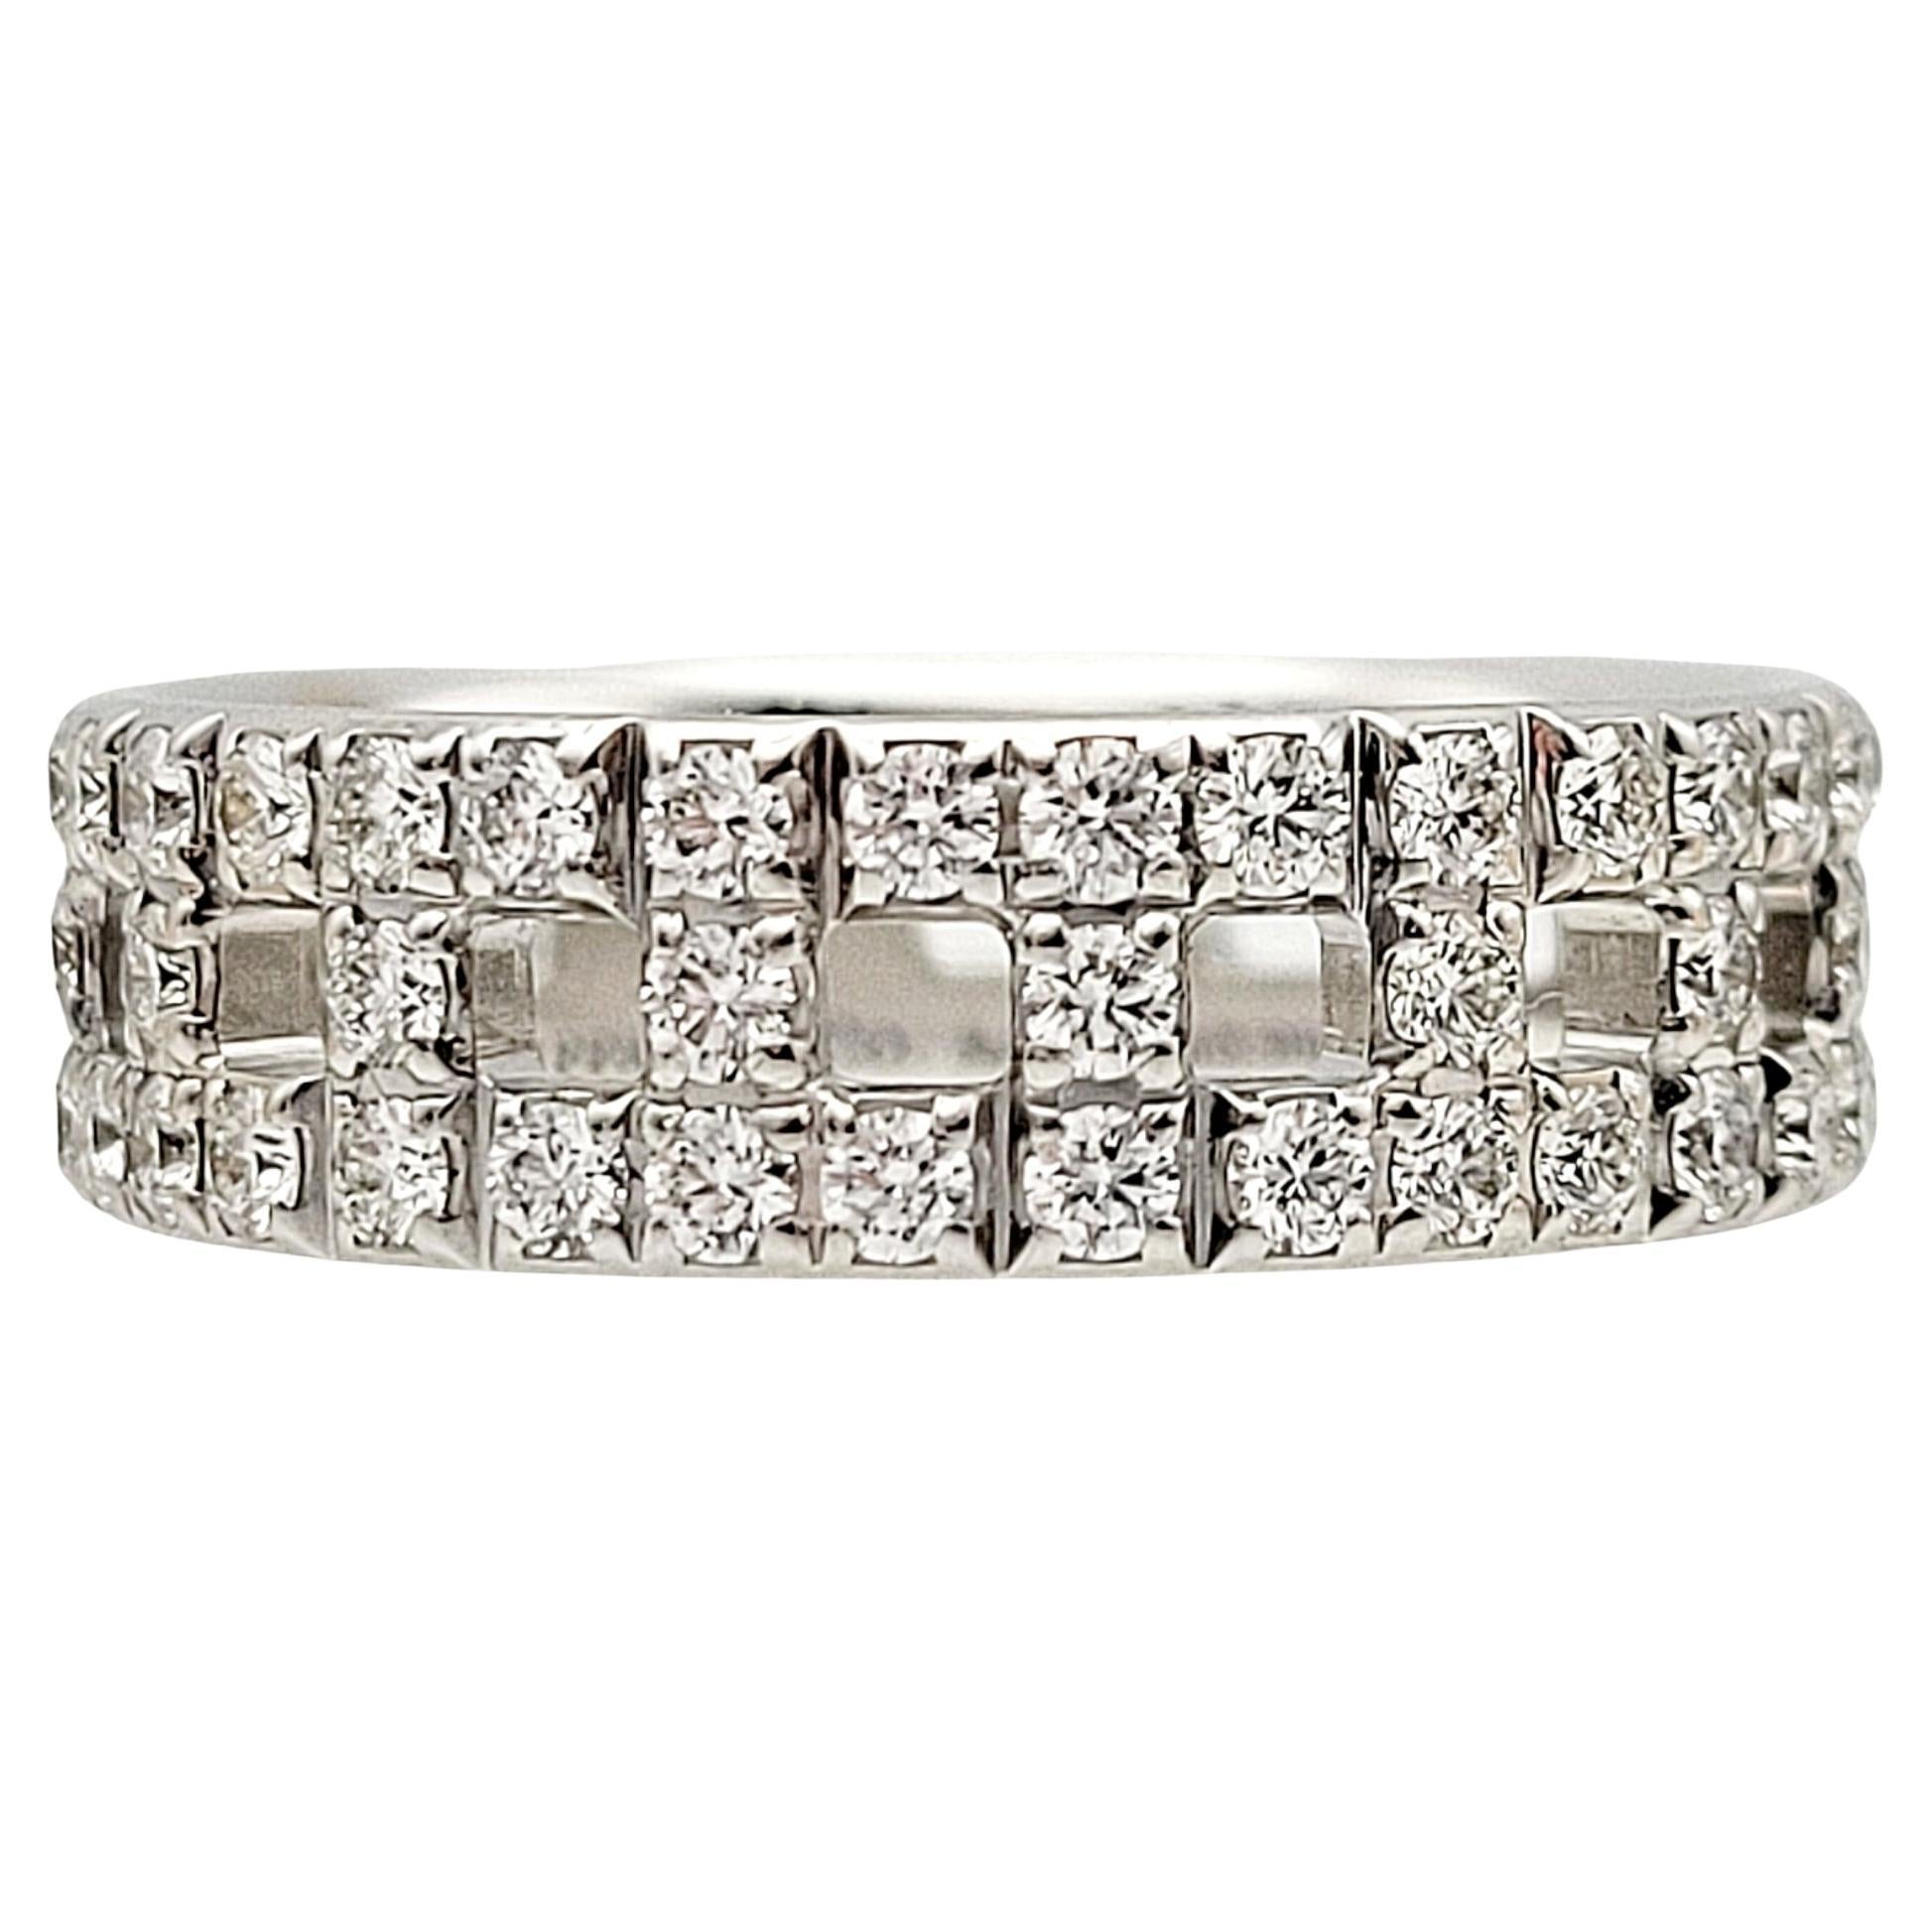 Tiffany & Co. Tiffany T True Wide Band Ring with Diamonds in 18 Karat White Gold